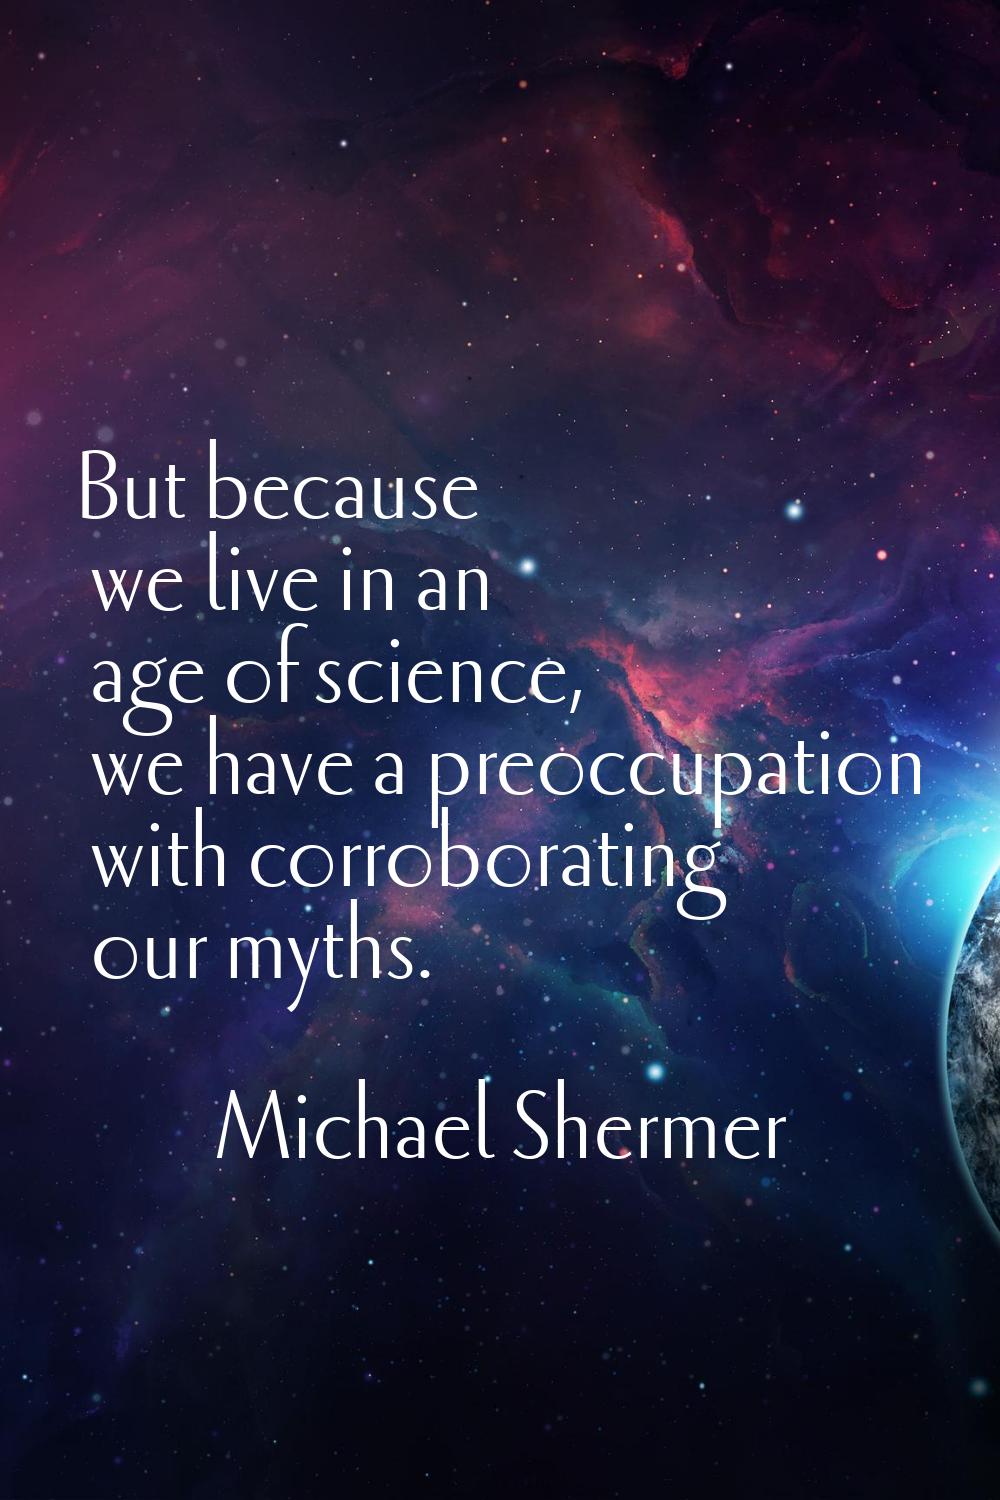 But because we live in an age of science, we have a preoccupation with corroborating our myths.